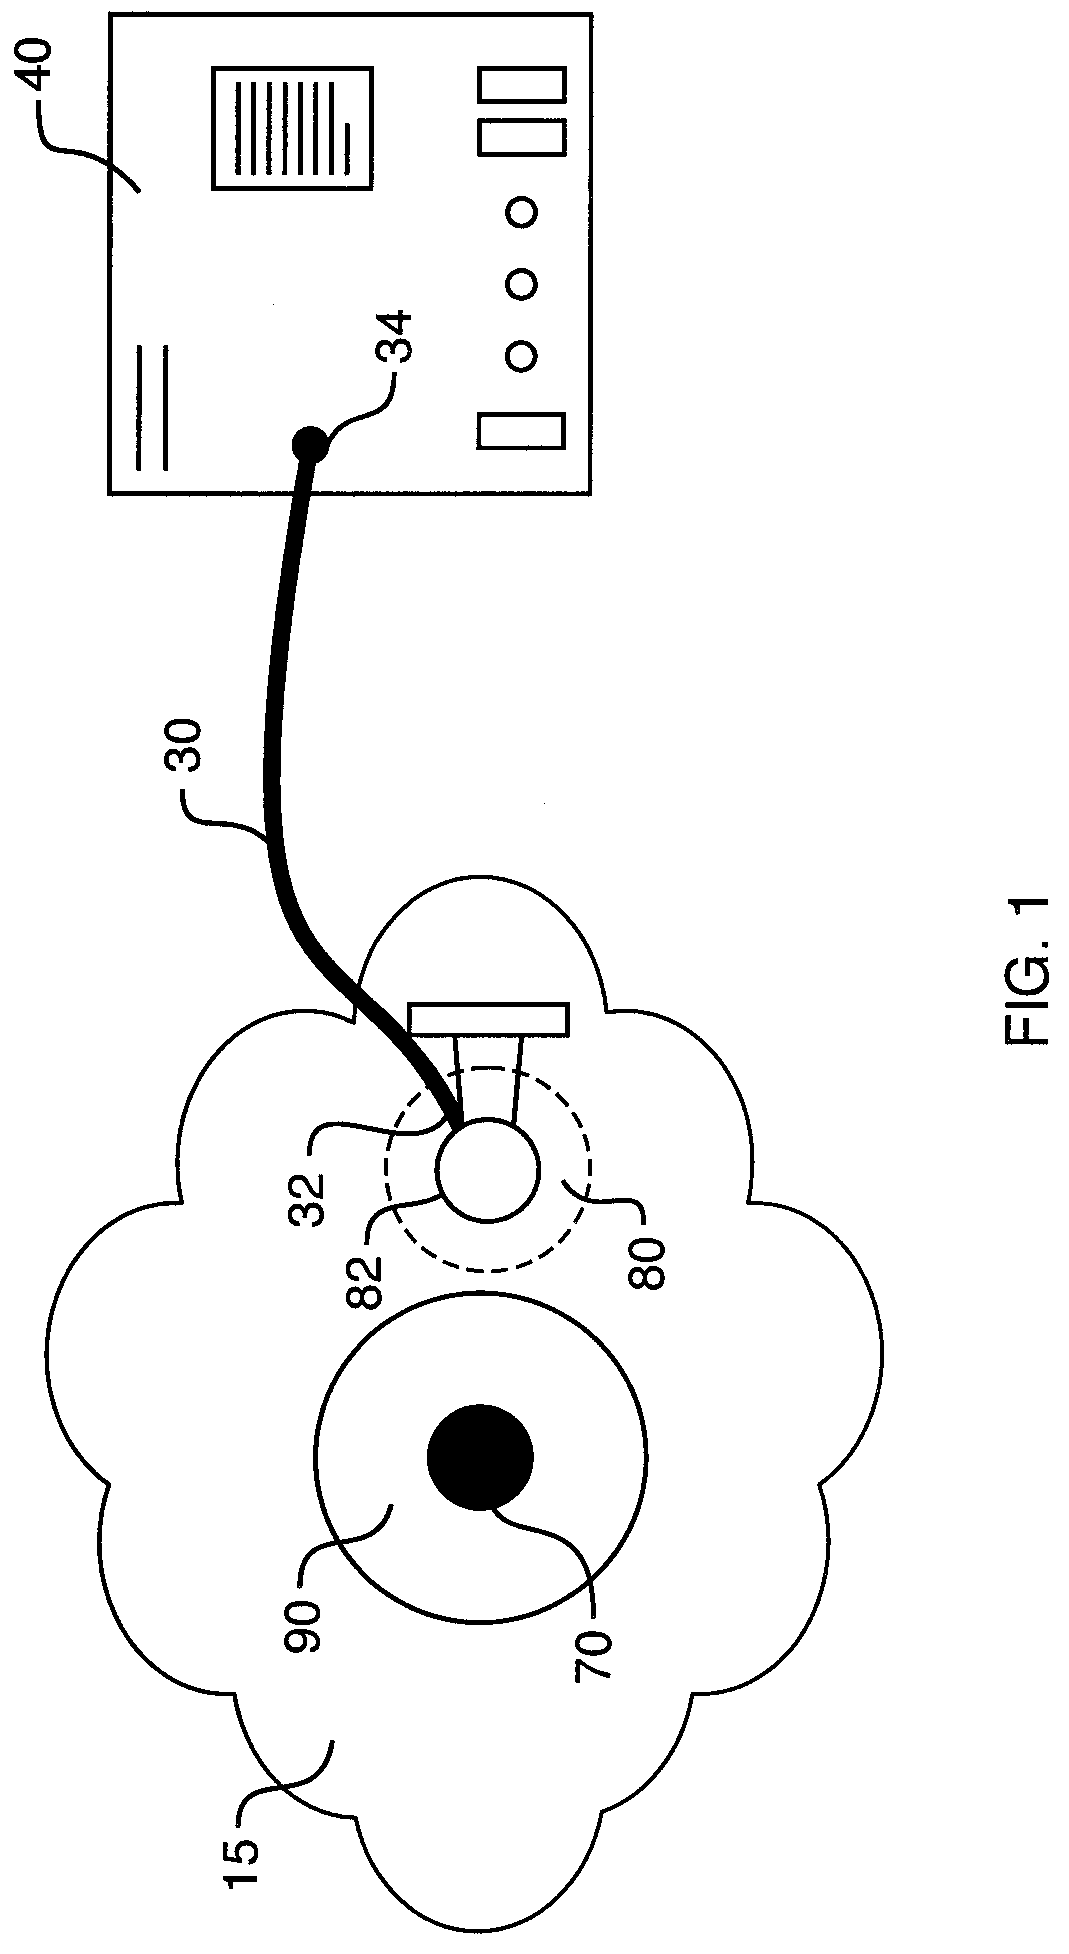 Electrode connection system